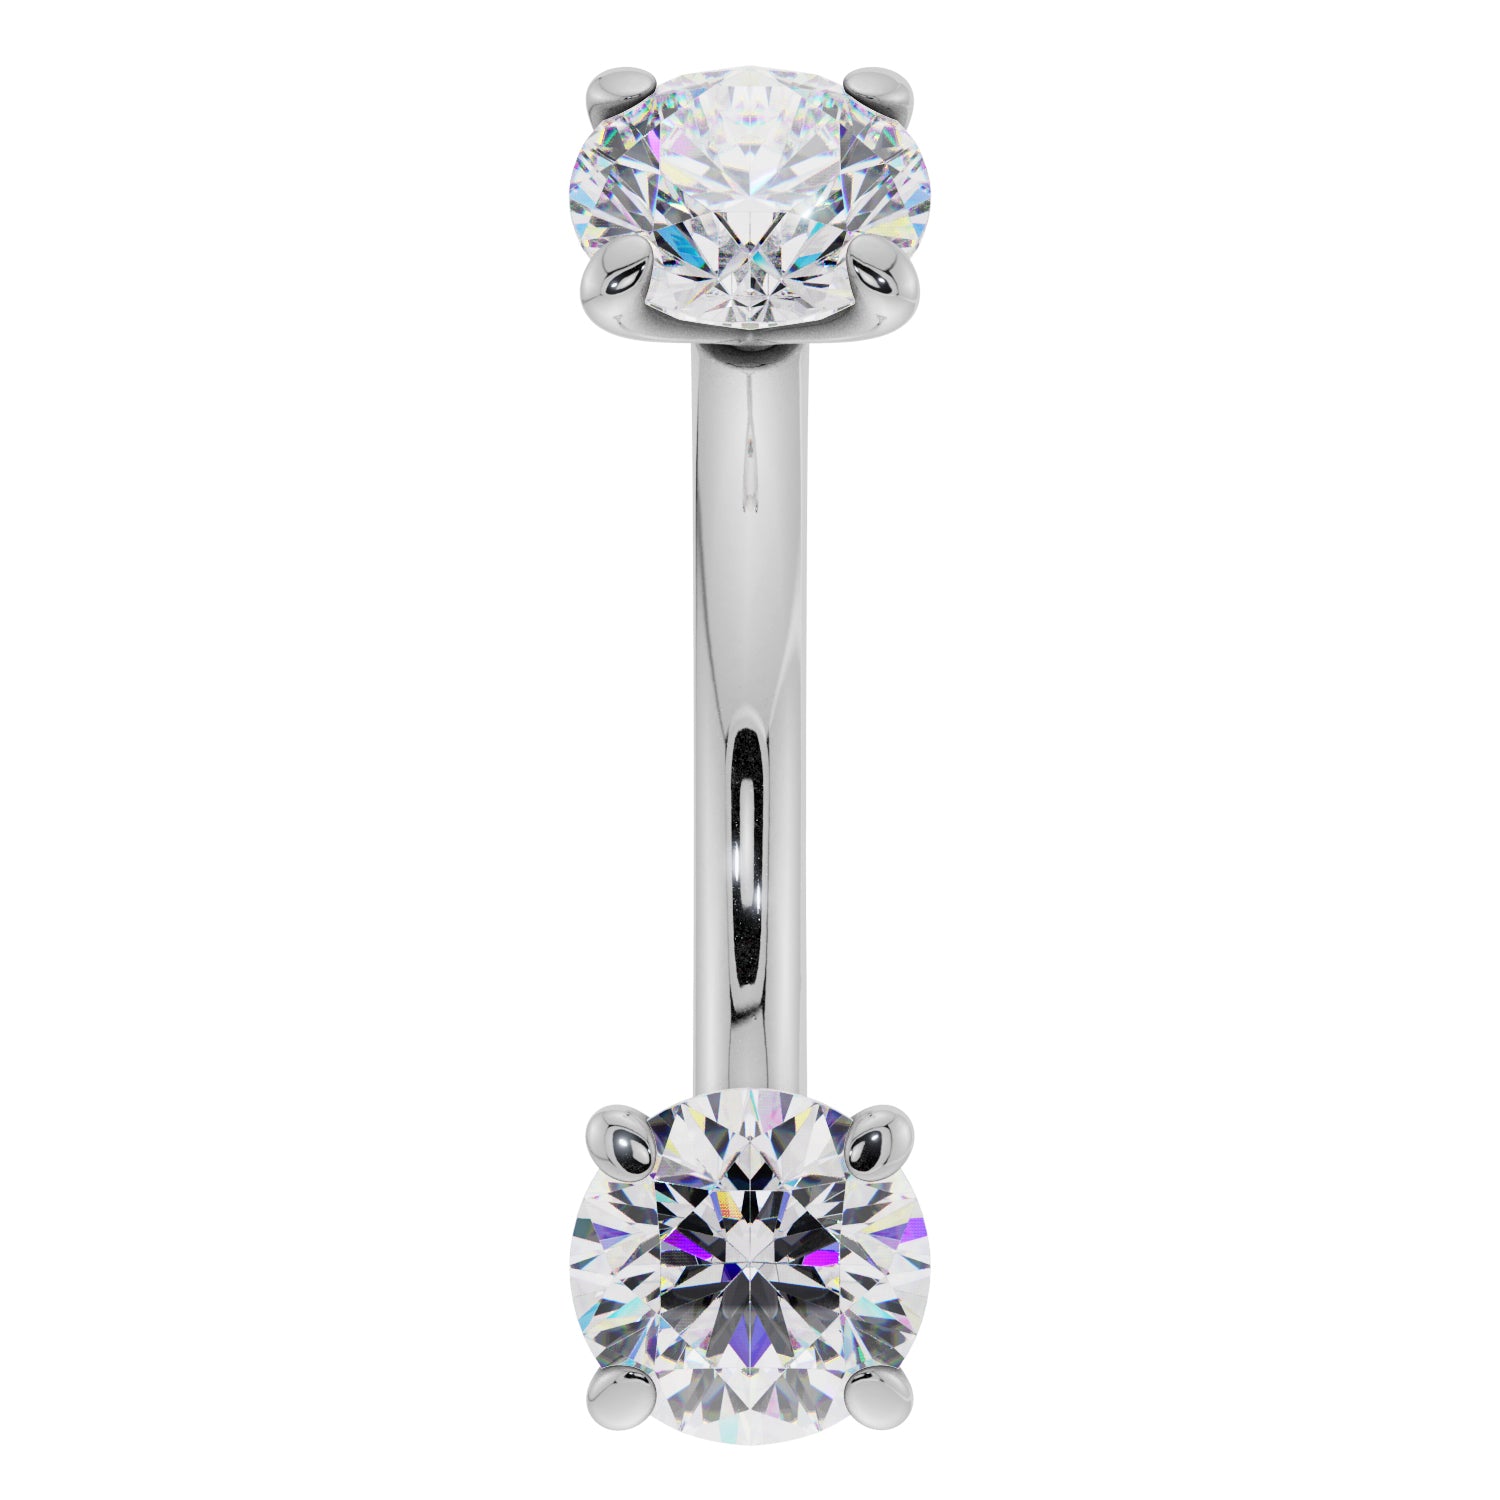 Cubic Zirconia Prong-Set Eyebrow Rook Belly Curved Barbell-14K White Gold   16G (1.2mm)   7 16